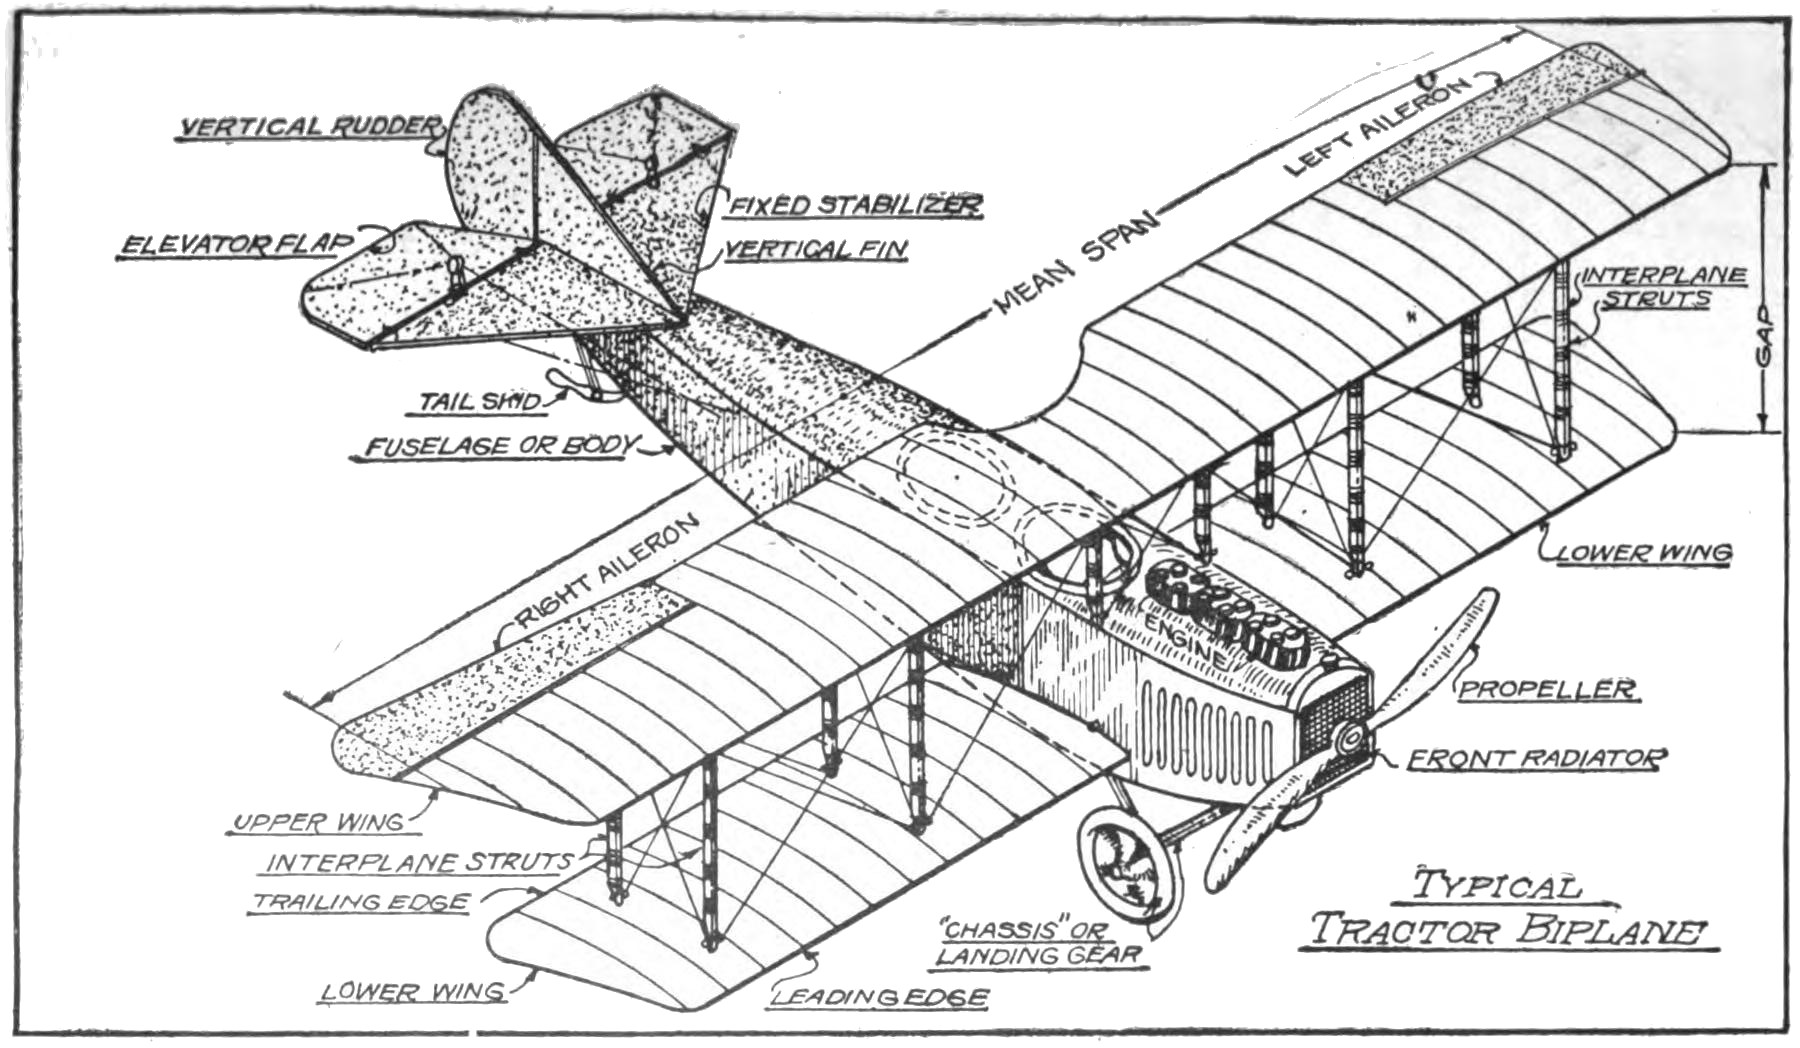 Fig. 12.A. Diagram of the Tractor Biplane